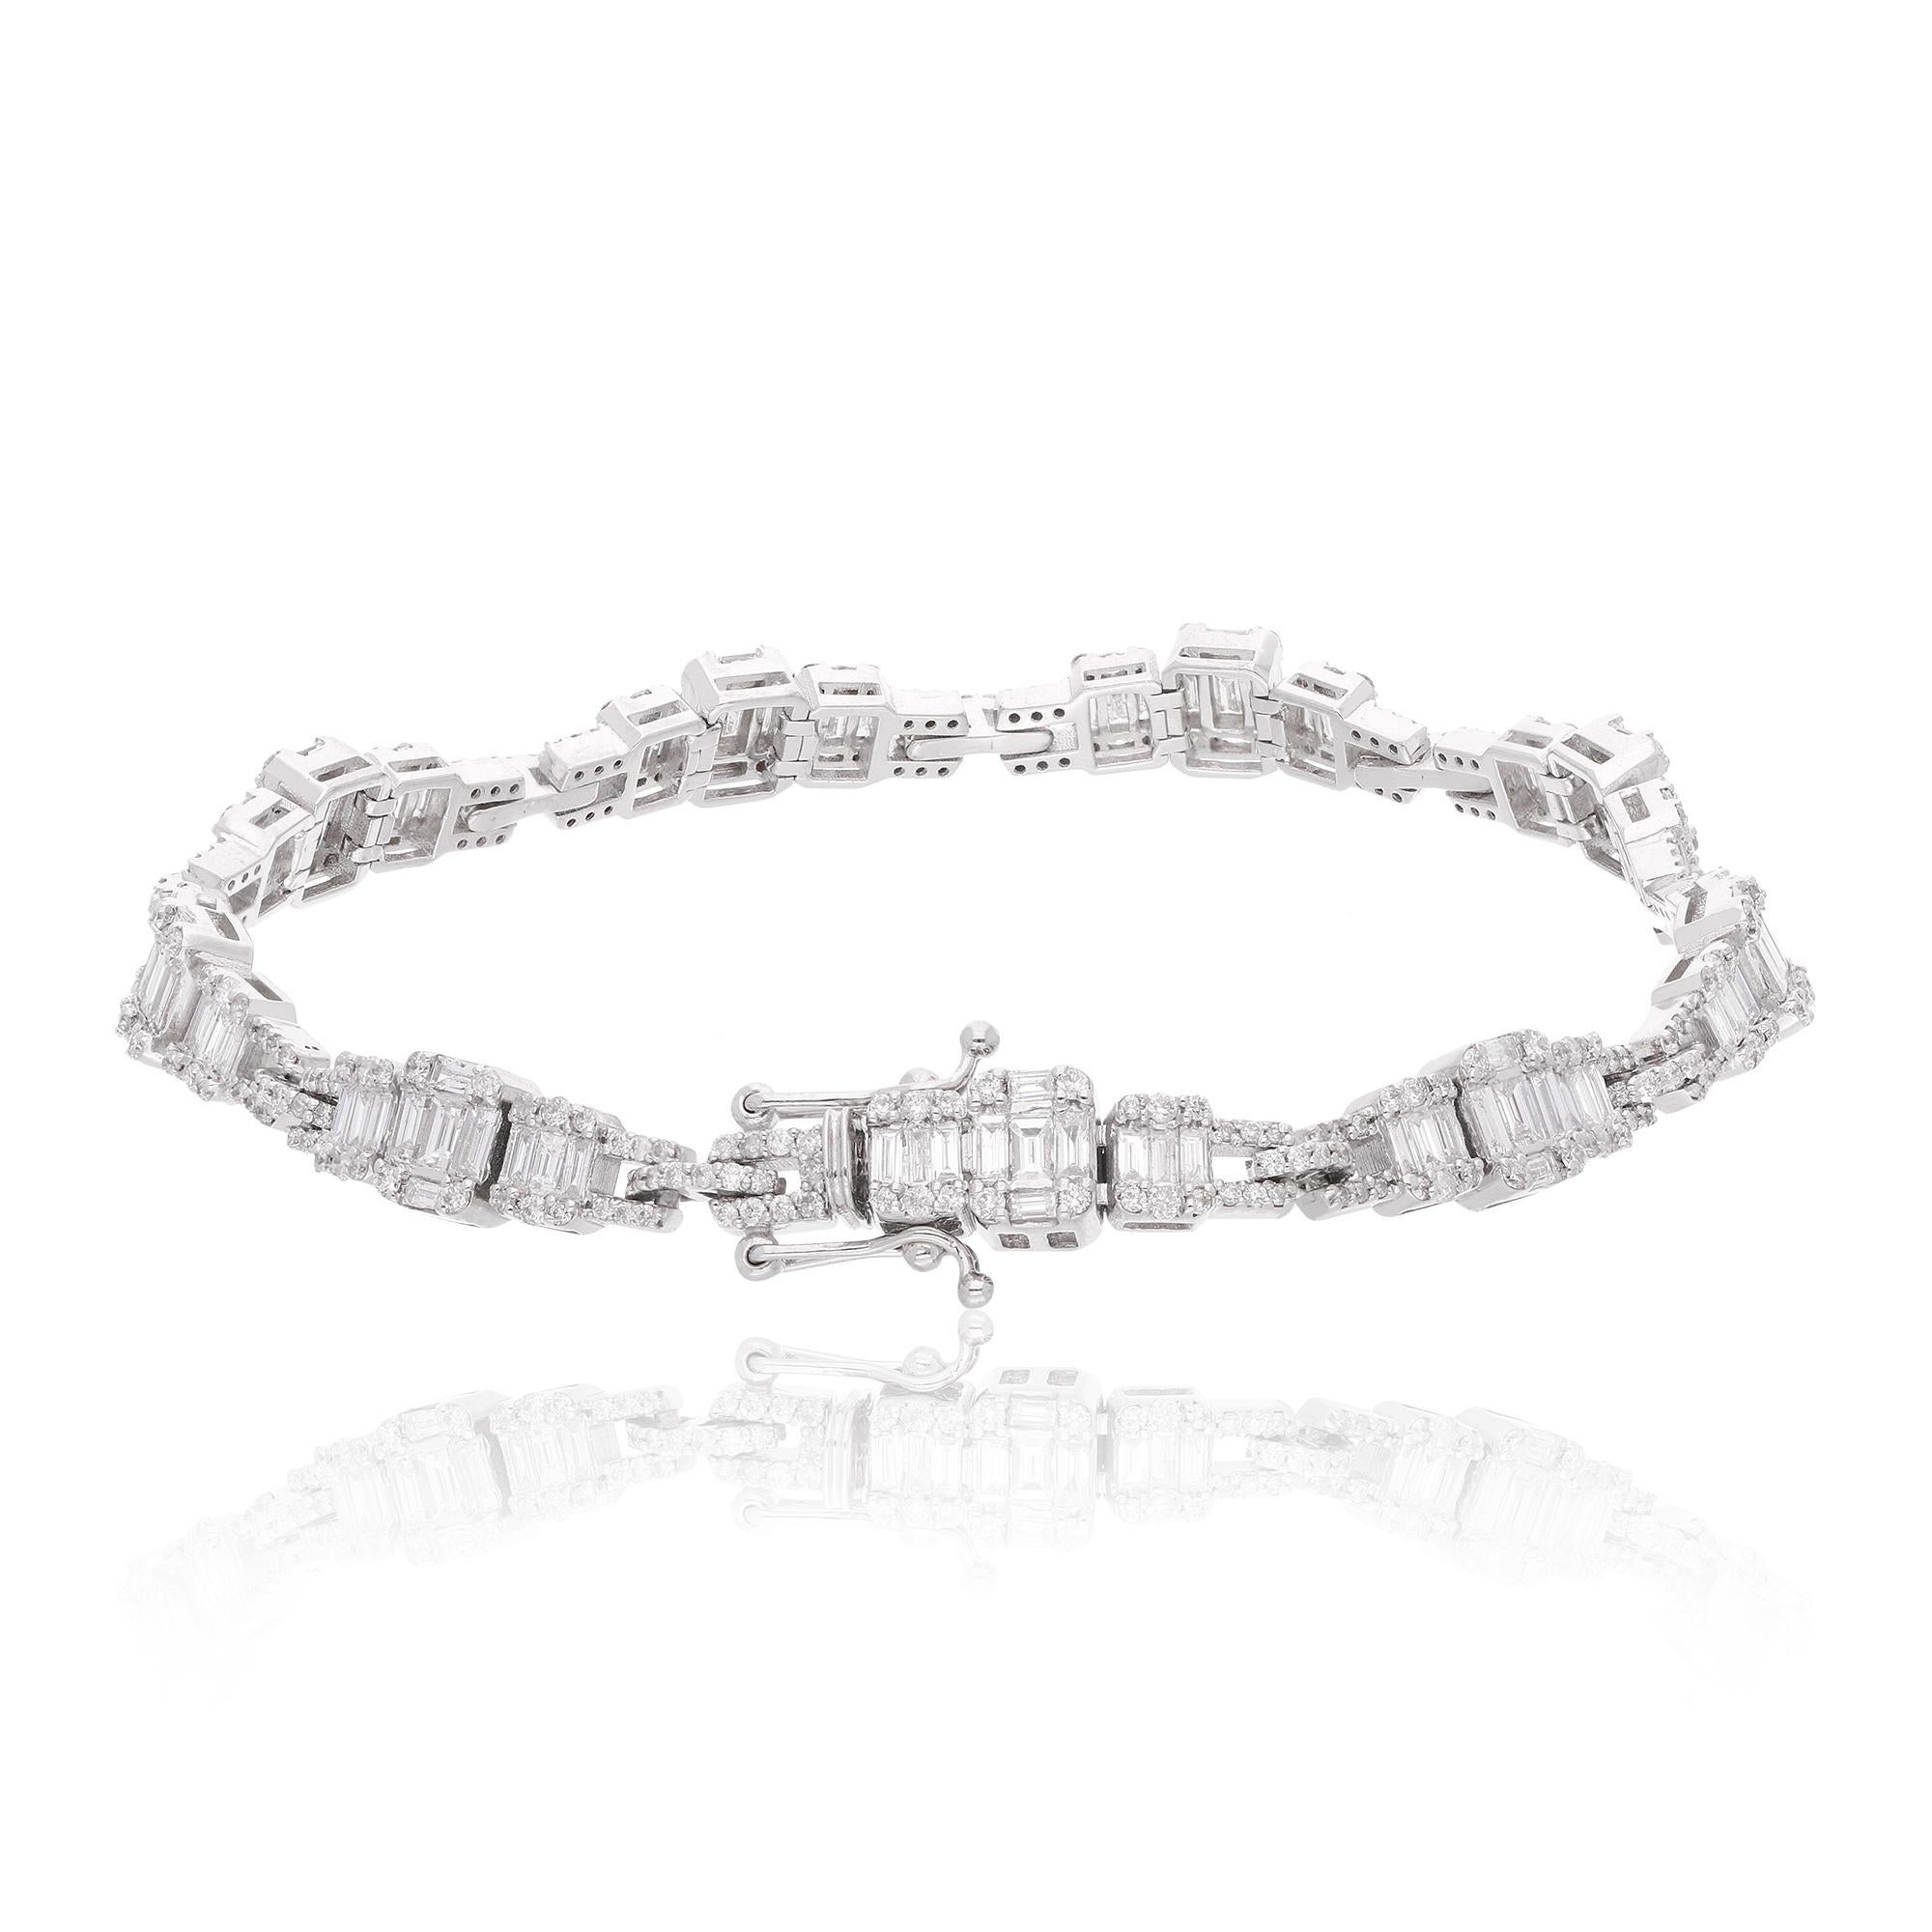 Item Code :- SEBR-42813
Gross Wt. :- 16.37 gm
18k White Gold Wt. :- 15.57 gm
Natural Diamond Wt. :- 4.00 Ct. ( AVERAGE DIAMOND CLARITY SI1-SI2 & COLOR H-I )
Bracelet Length :- 7 Inches Long

✦ Sizing
.....................
We can adjust most items to